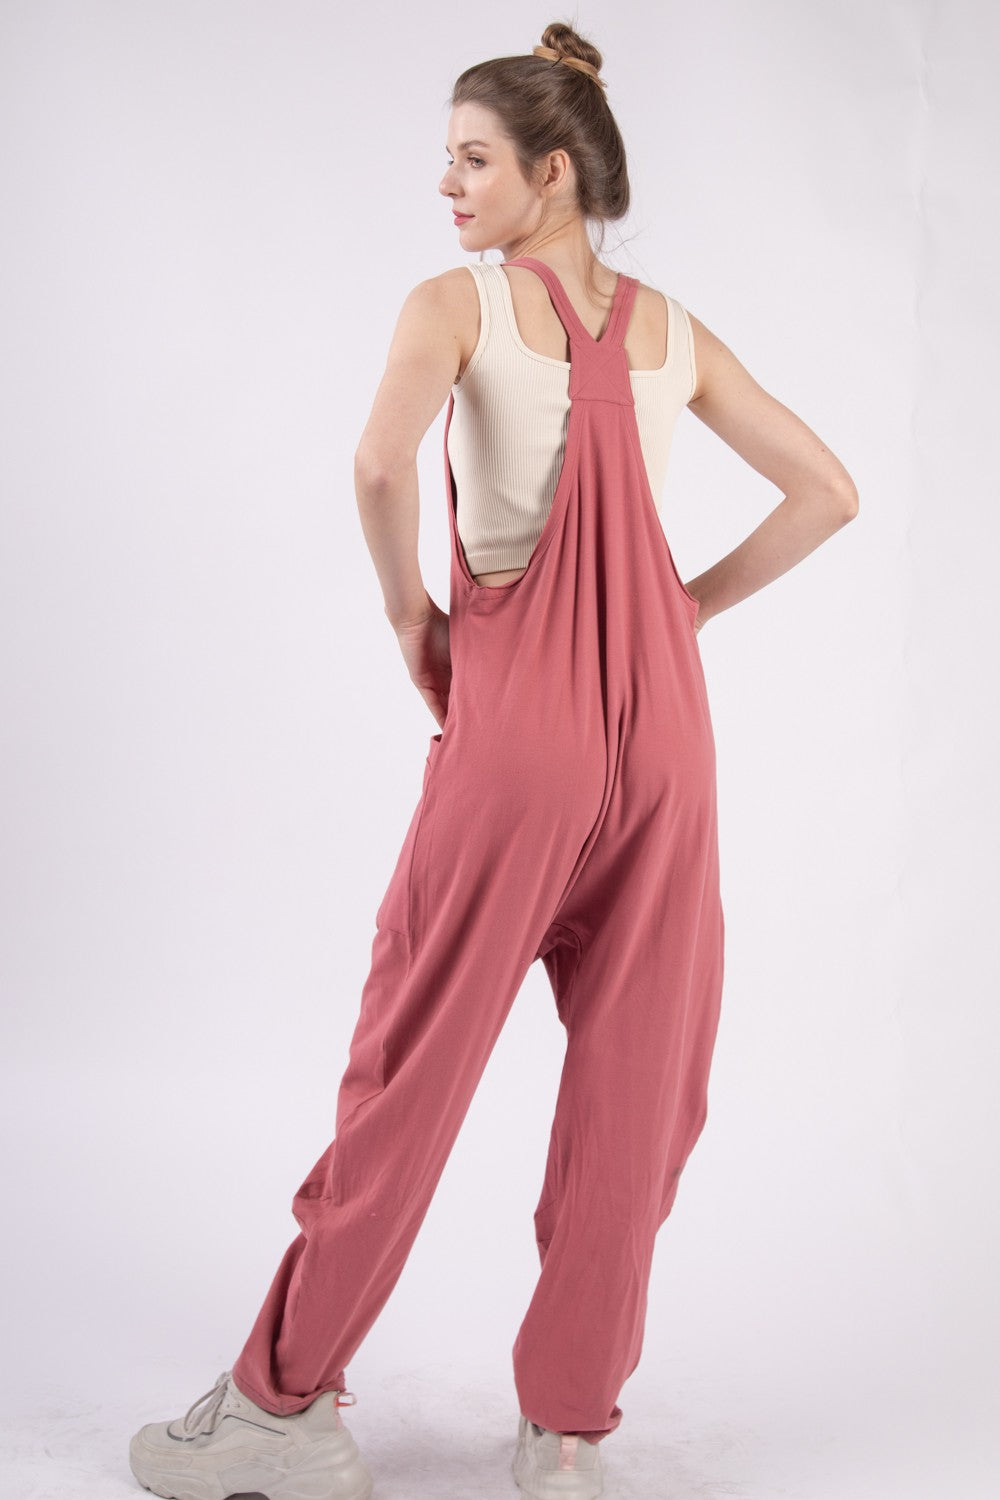 Lavender VERY J  Plunge Sleeveless Jumpsuit with Pockets Sentient Beauty Fashions Apparel & Accessories